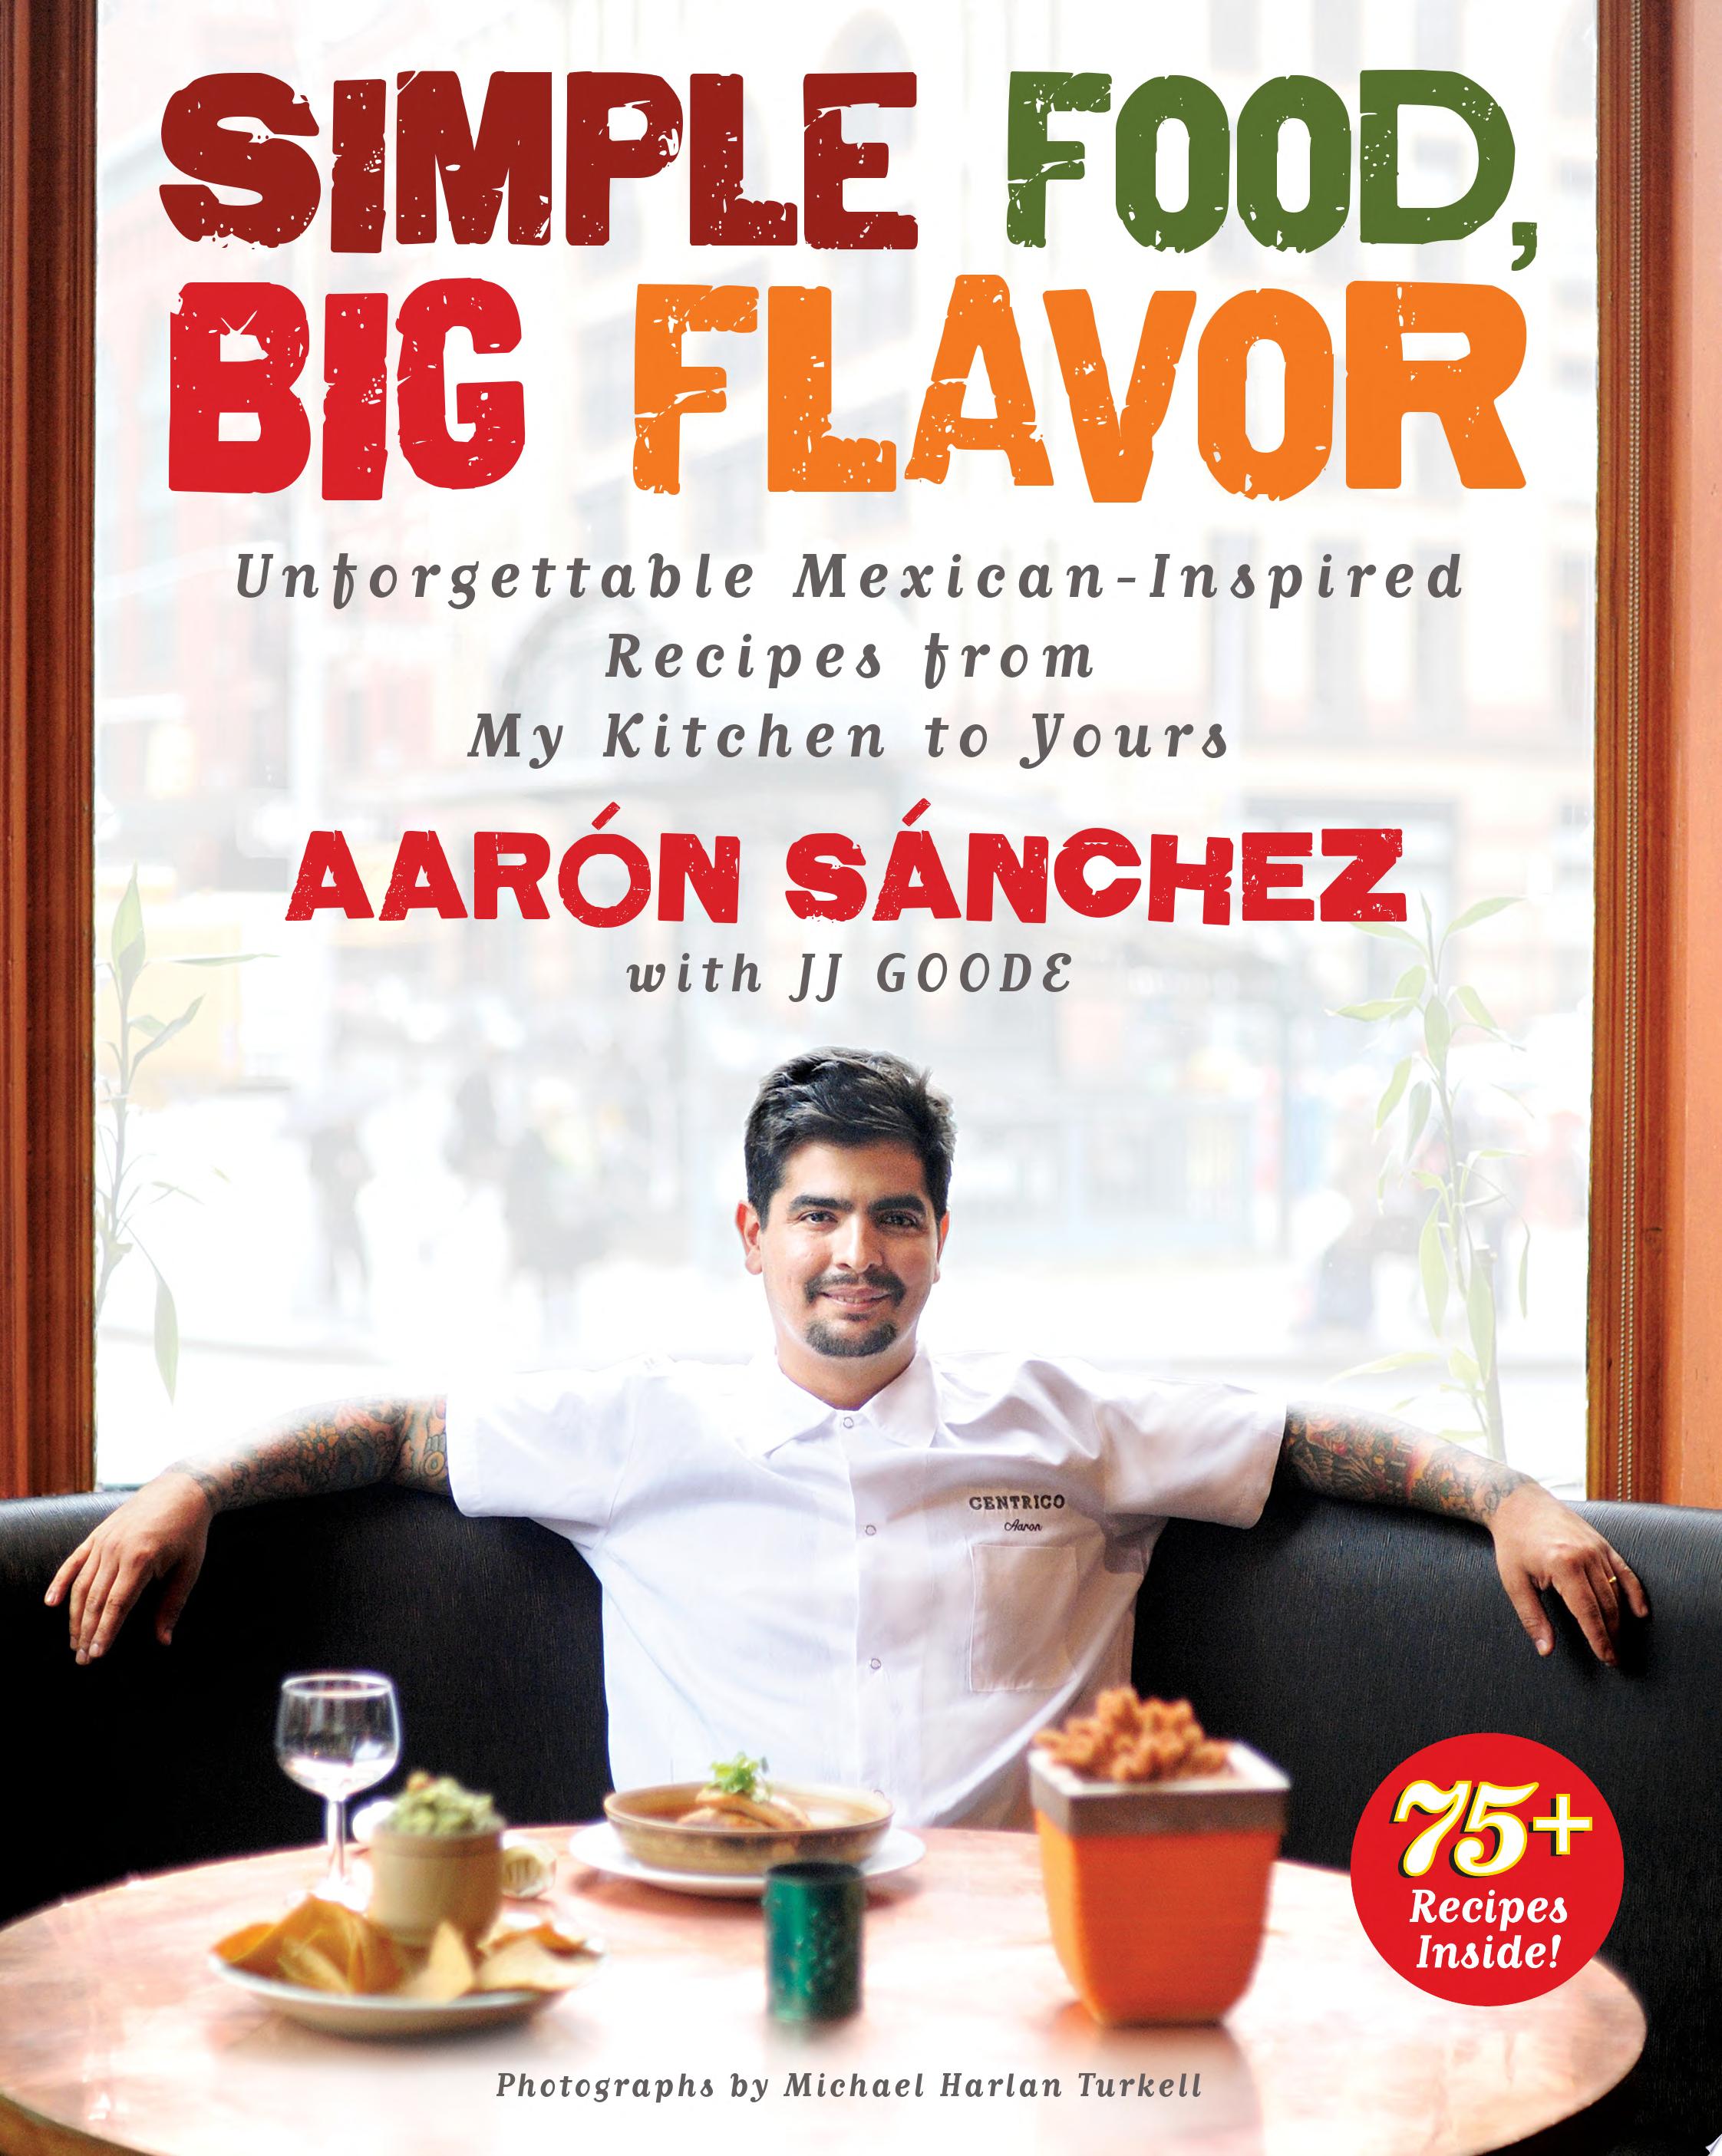 Image for "Simple Food, Big Flavor: unforgettable Mexican-inspired dishes from my kitchen to yours"